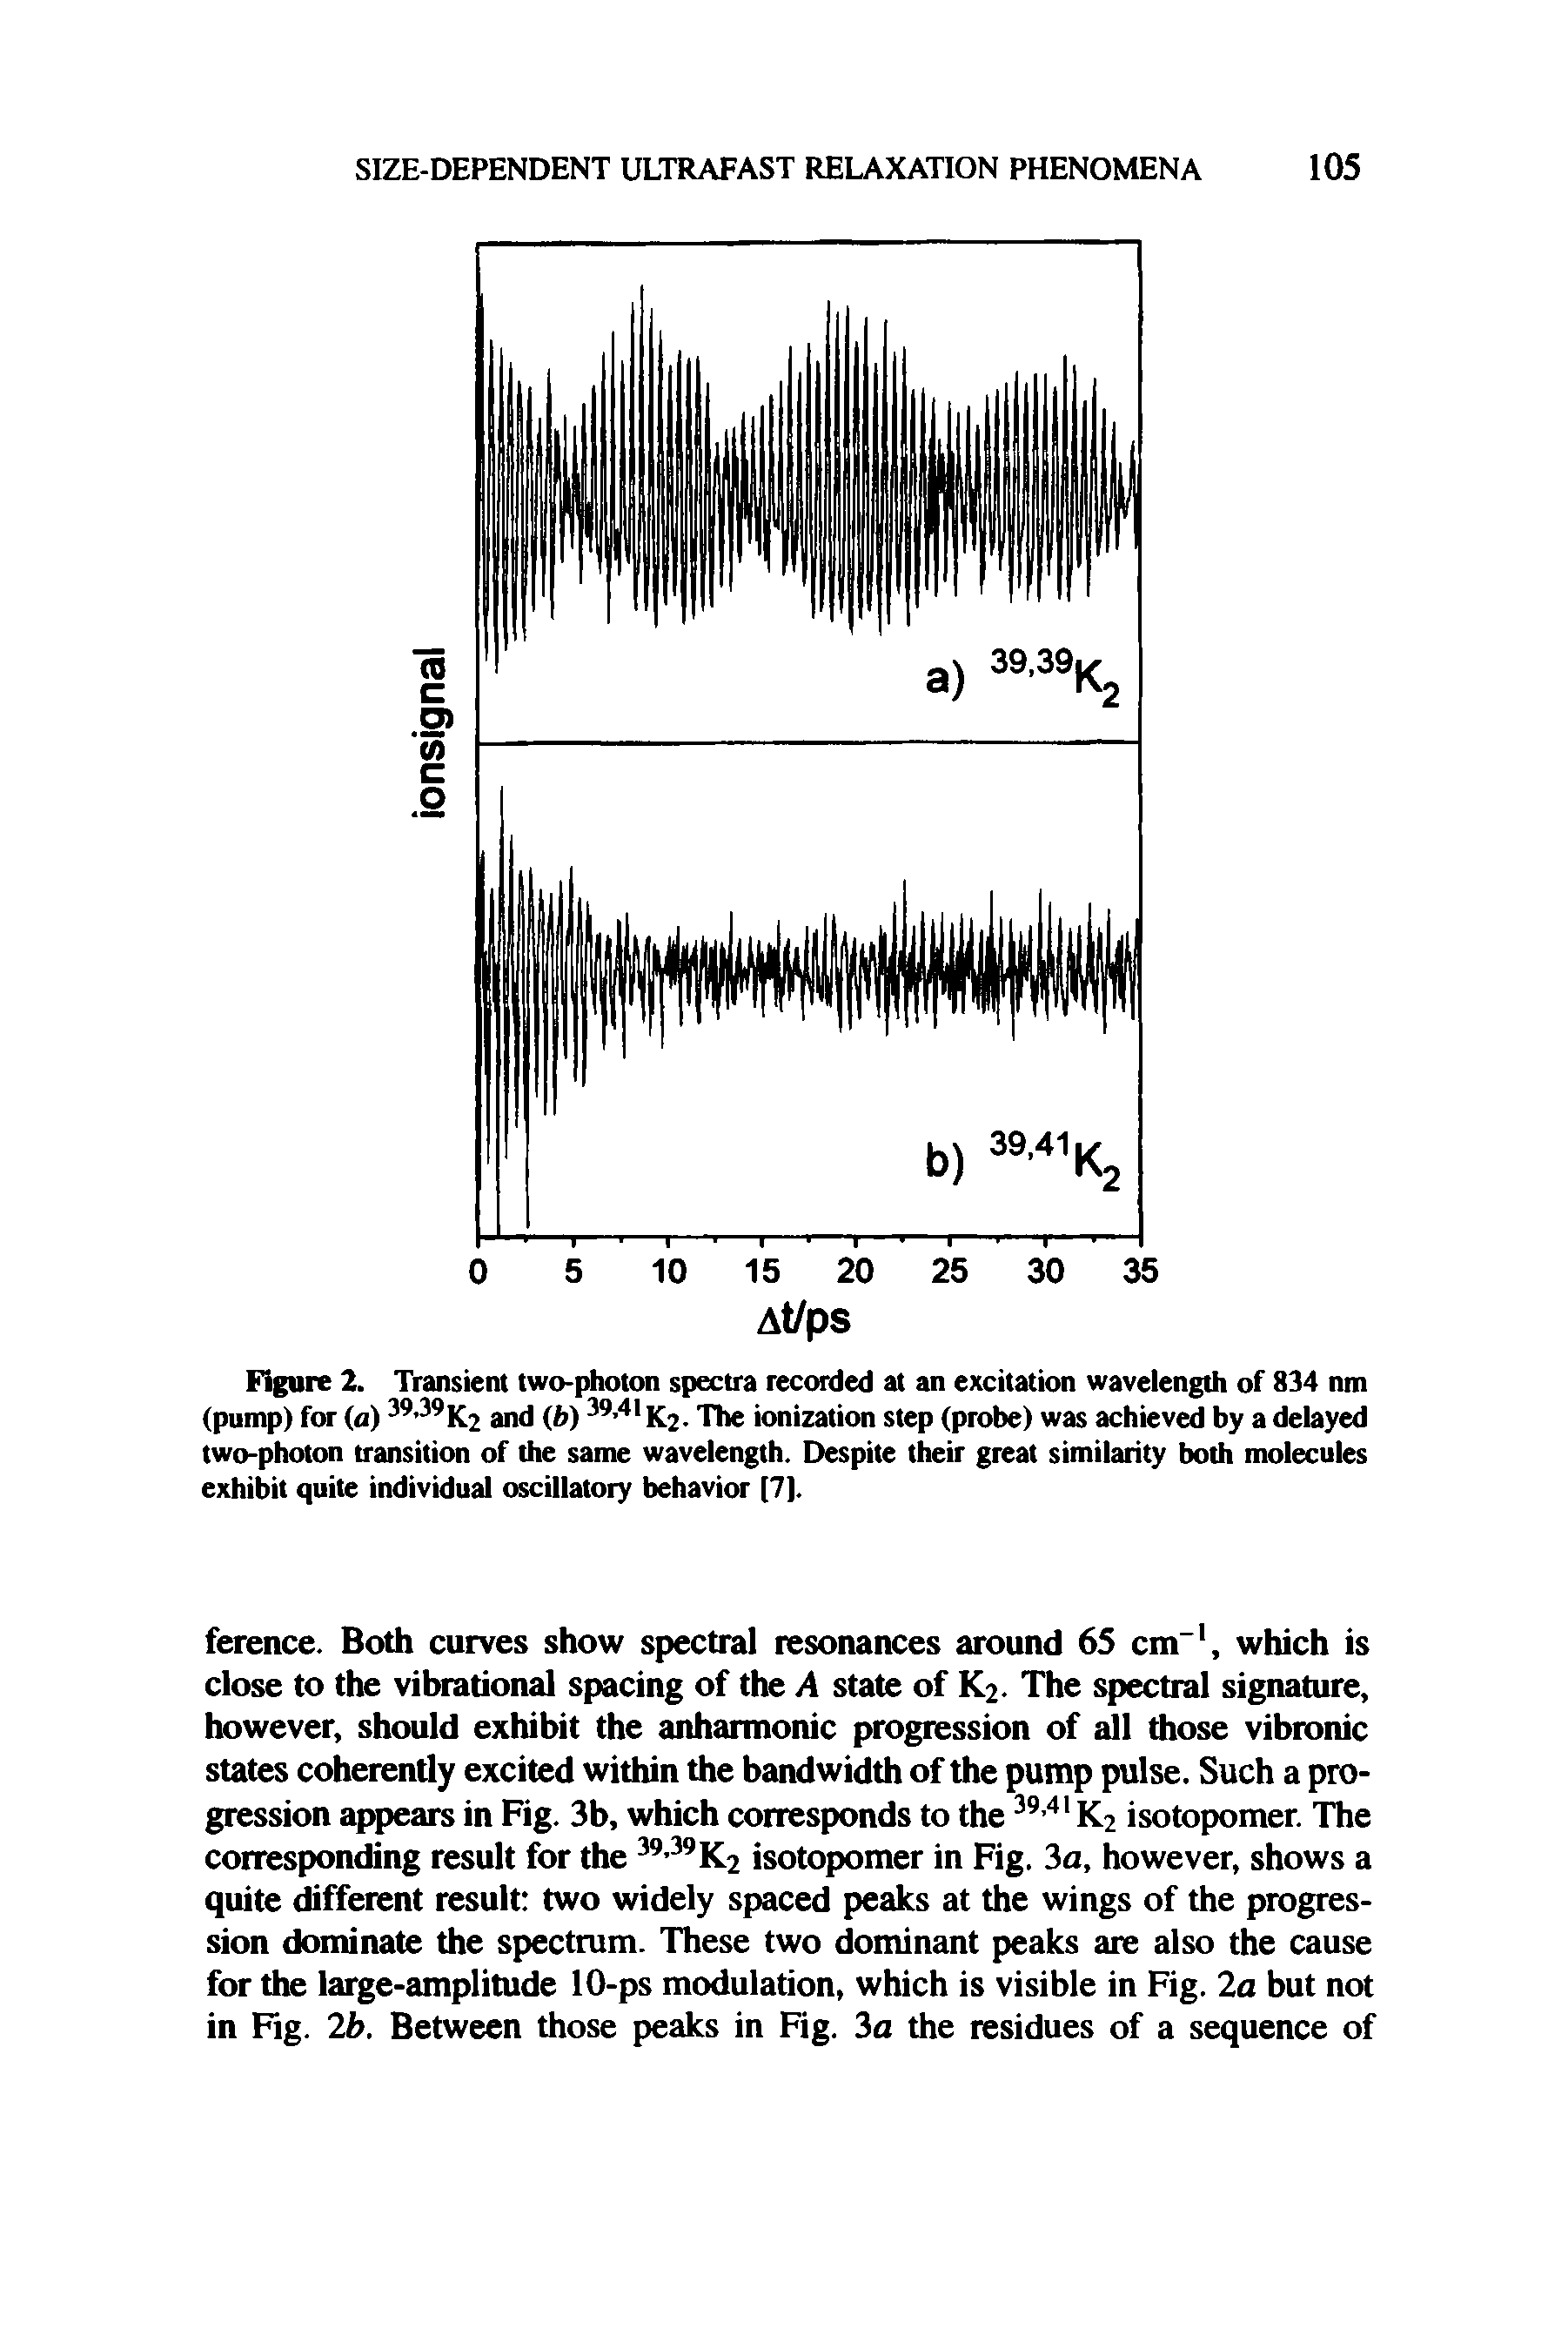 Figure 2. Transient two-photon spectra recorded at an excitation wavelength of 834 nm (pump) for (a)39,39 K2 and (b)39,41 K2. The ionization step (probe) was achieved by a delayed two-photon transition of the same wavelength. Despite their great similarity both molecules exhibit quite individual oscillatory behavior [7],...